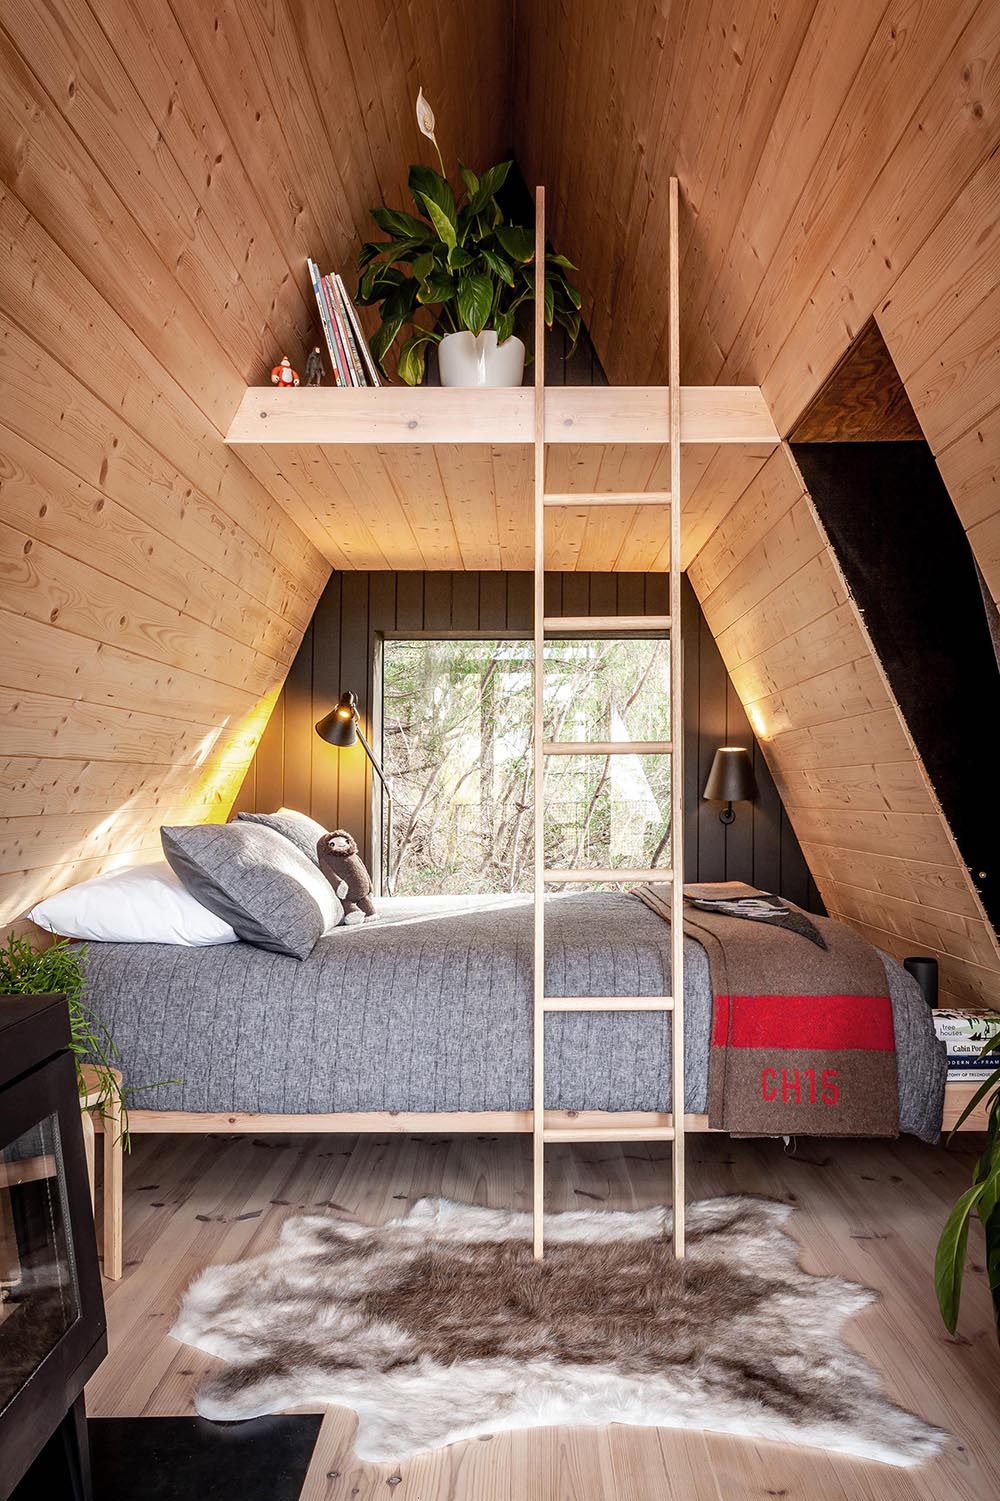 A small and modern wood-lined A-framed cabin with a sleeping area and lofted space.